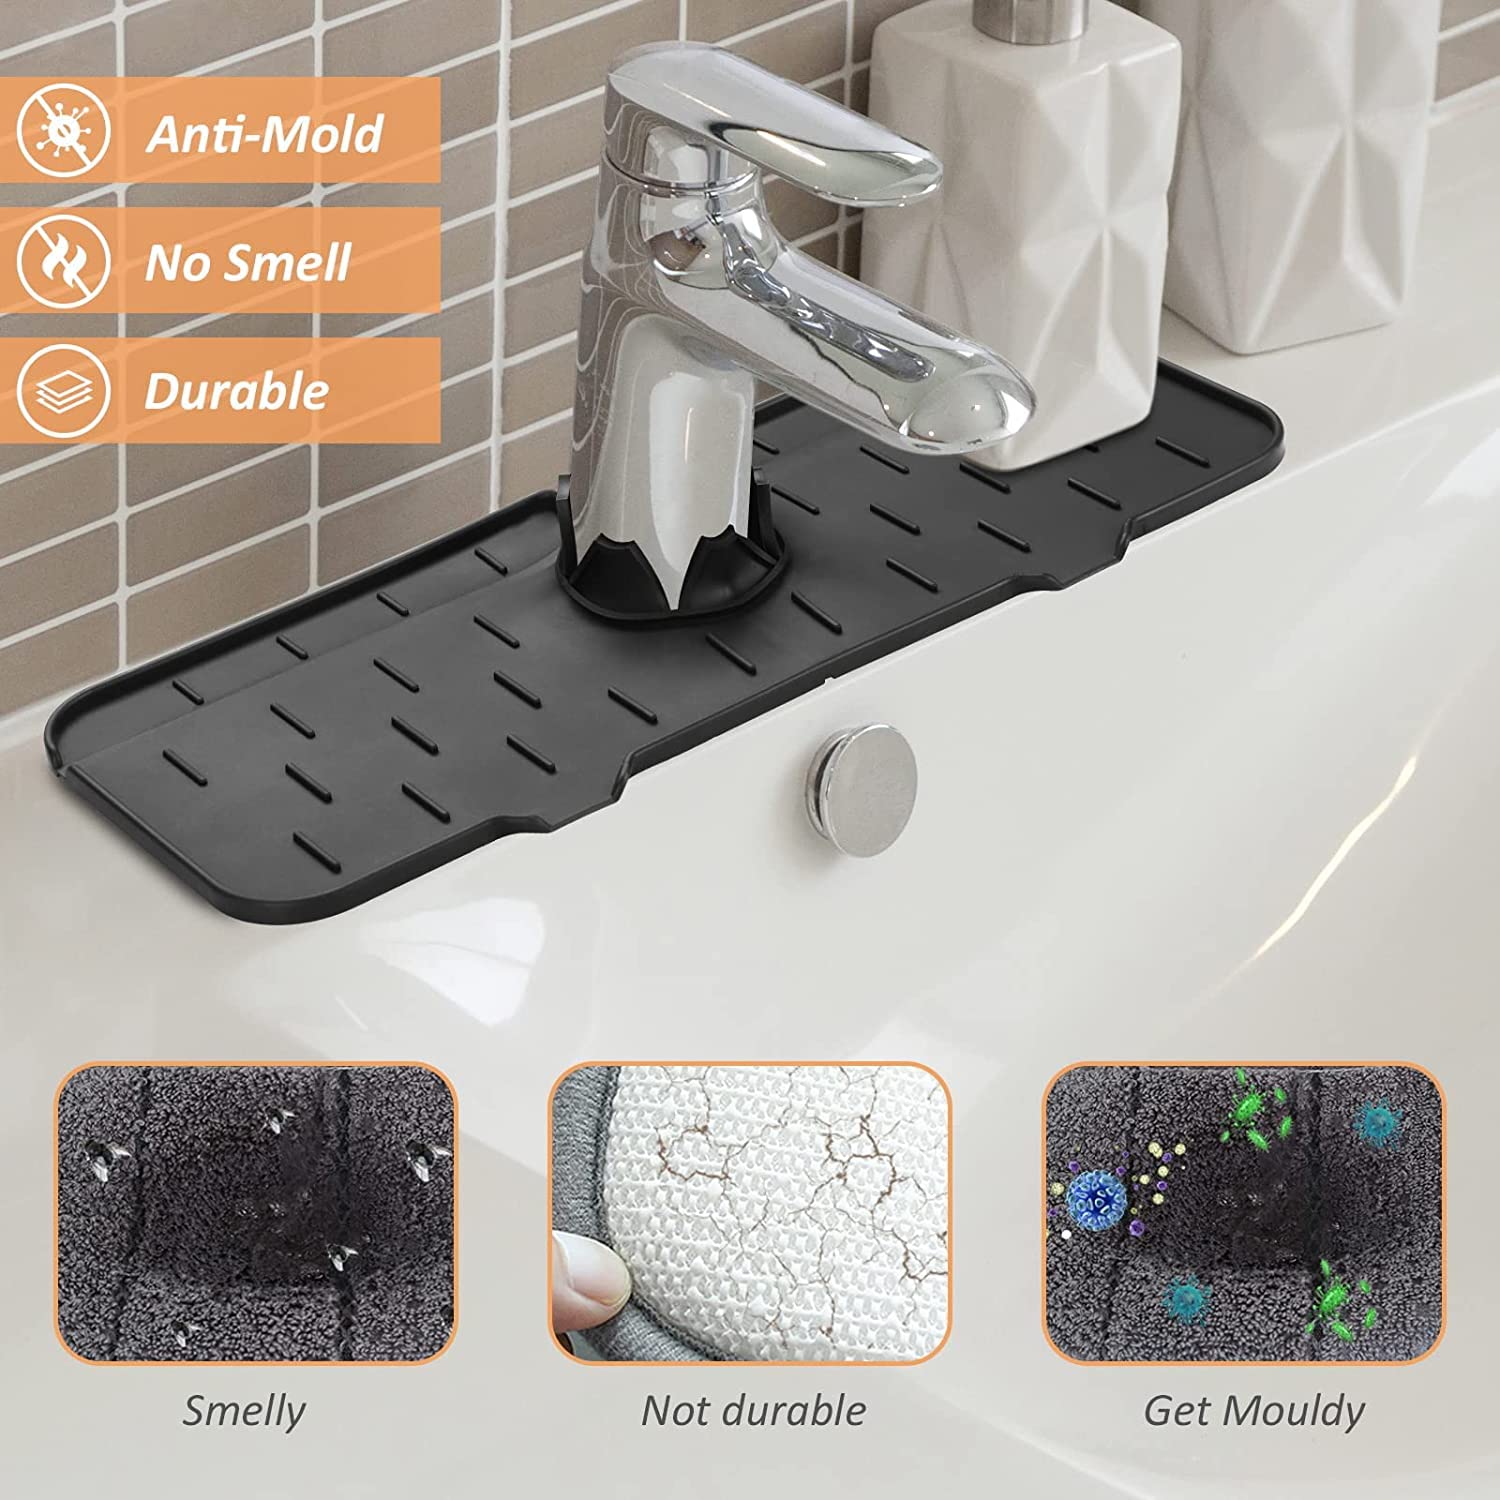 Kitchen Faucet Sink Splash Guard - Water Catcher Mat - Silicone Drying Mat with Built-in Drain Lip - Kitchen Bathroom Sink Drain Mat - Rubber Drying Mat for Countertop Protect